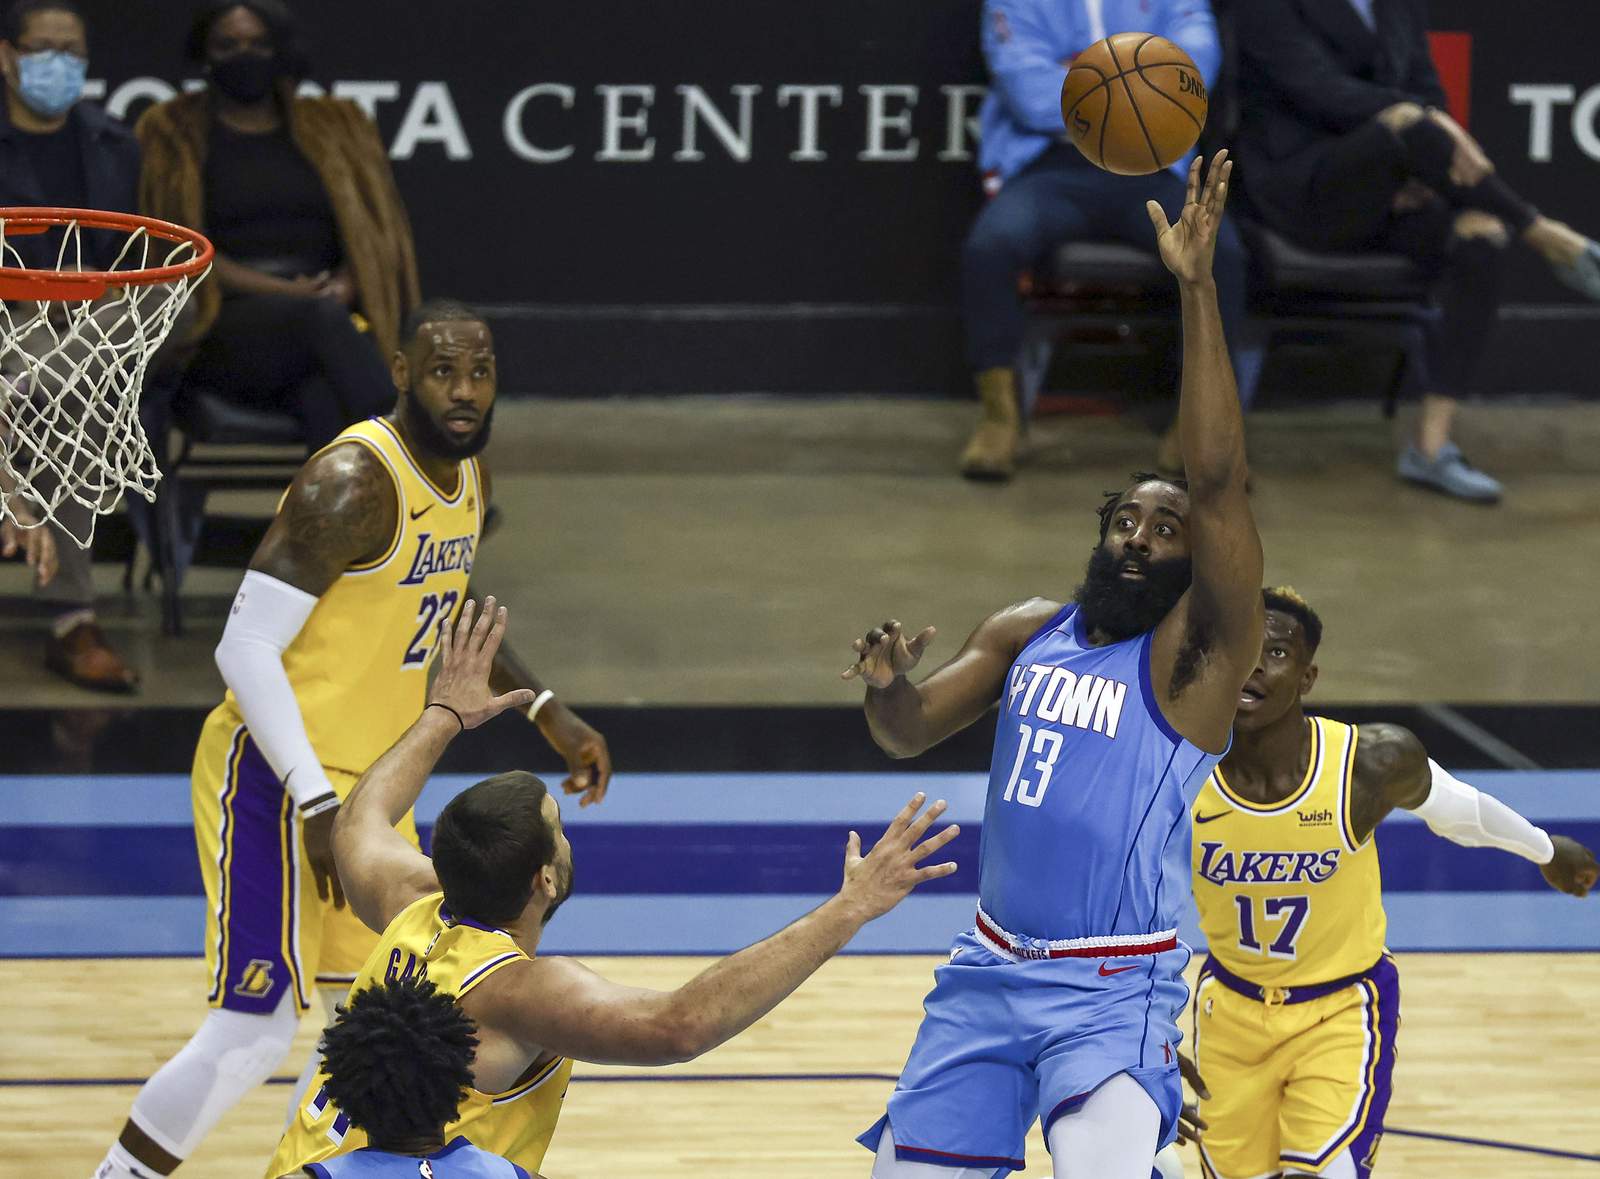 Harden sees title chance, says he'll sacrifice shots for it